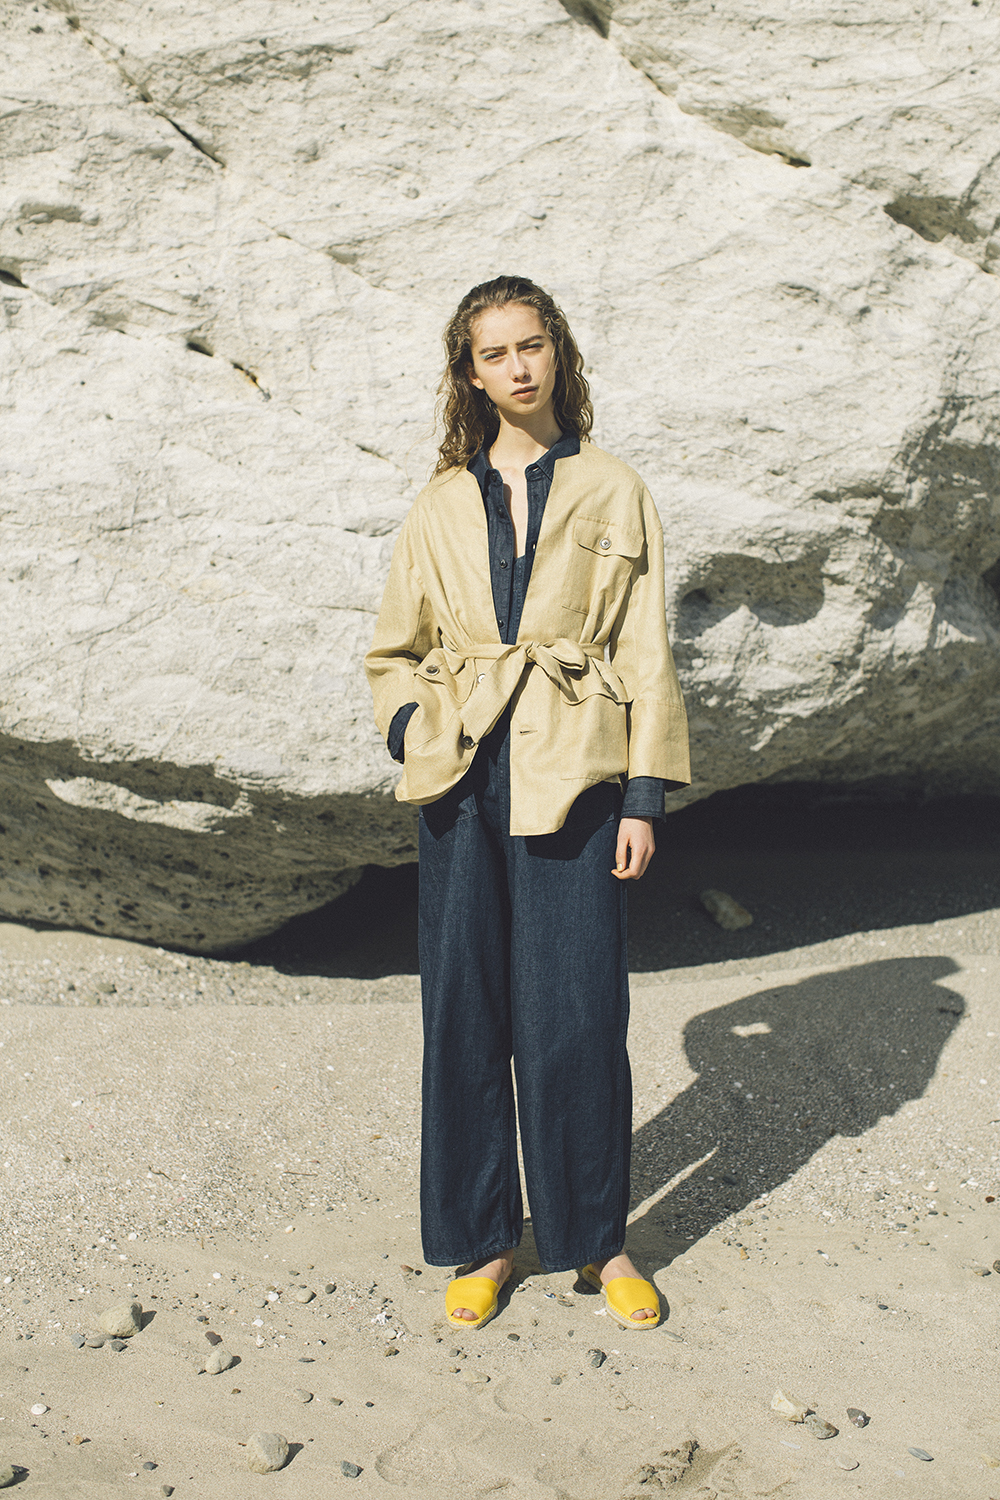 【WOMEN’S 2019 SS】- Glaring Color – LOOK アイテム